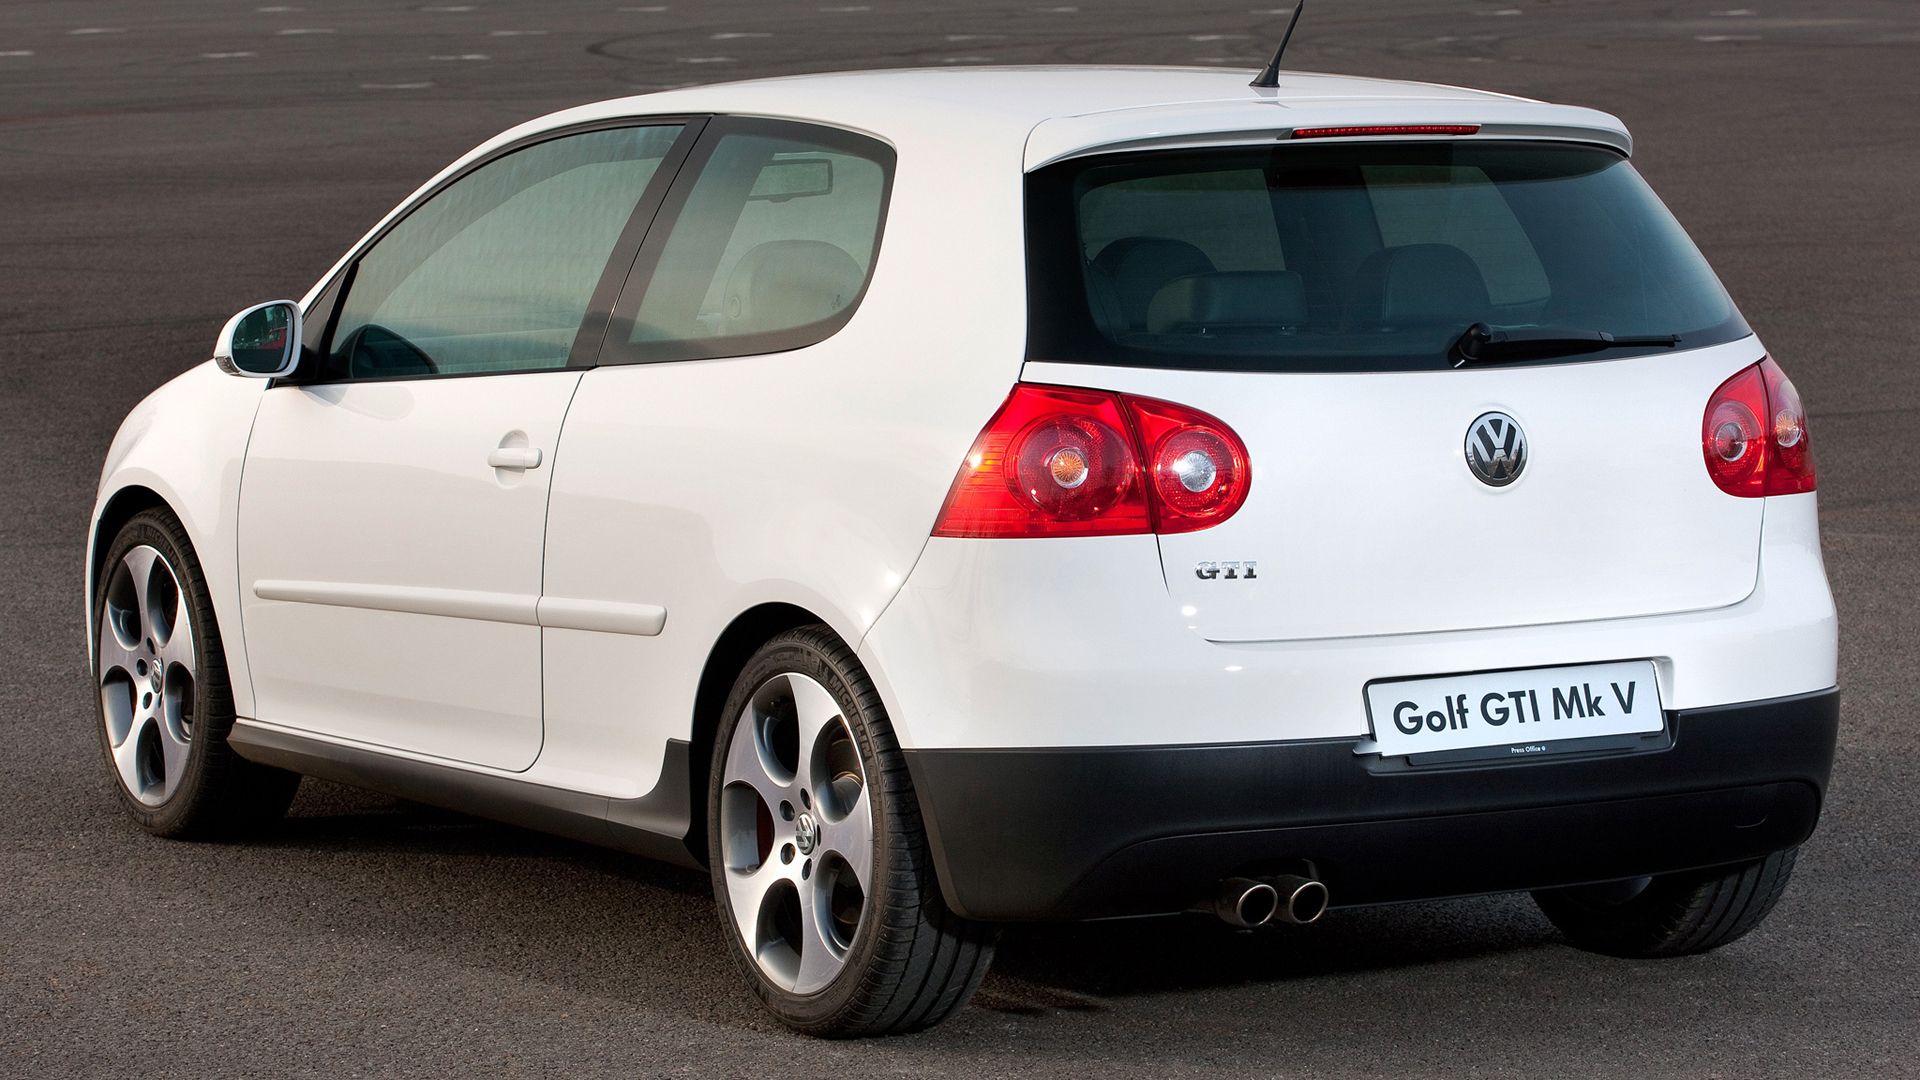 The rear of the Mk5 Golf GTI